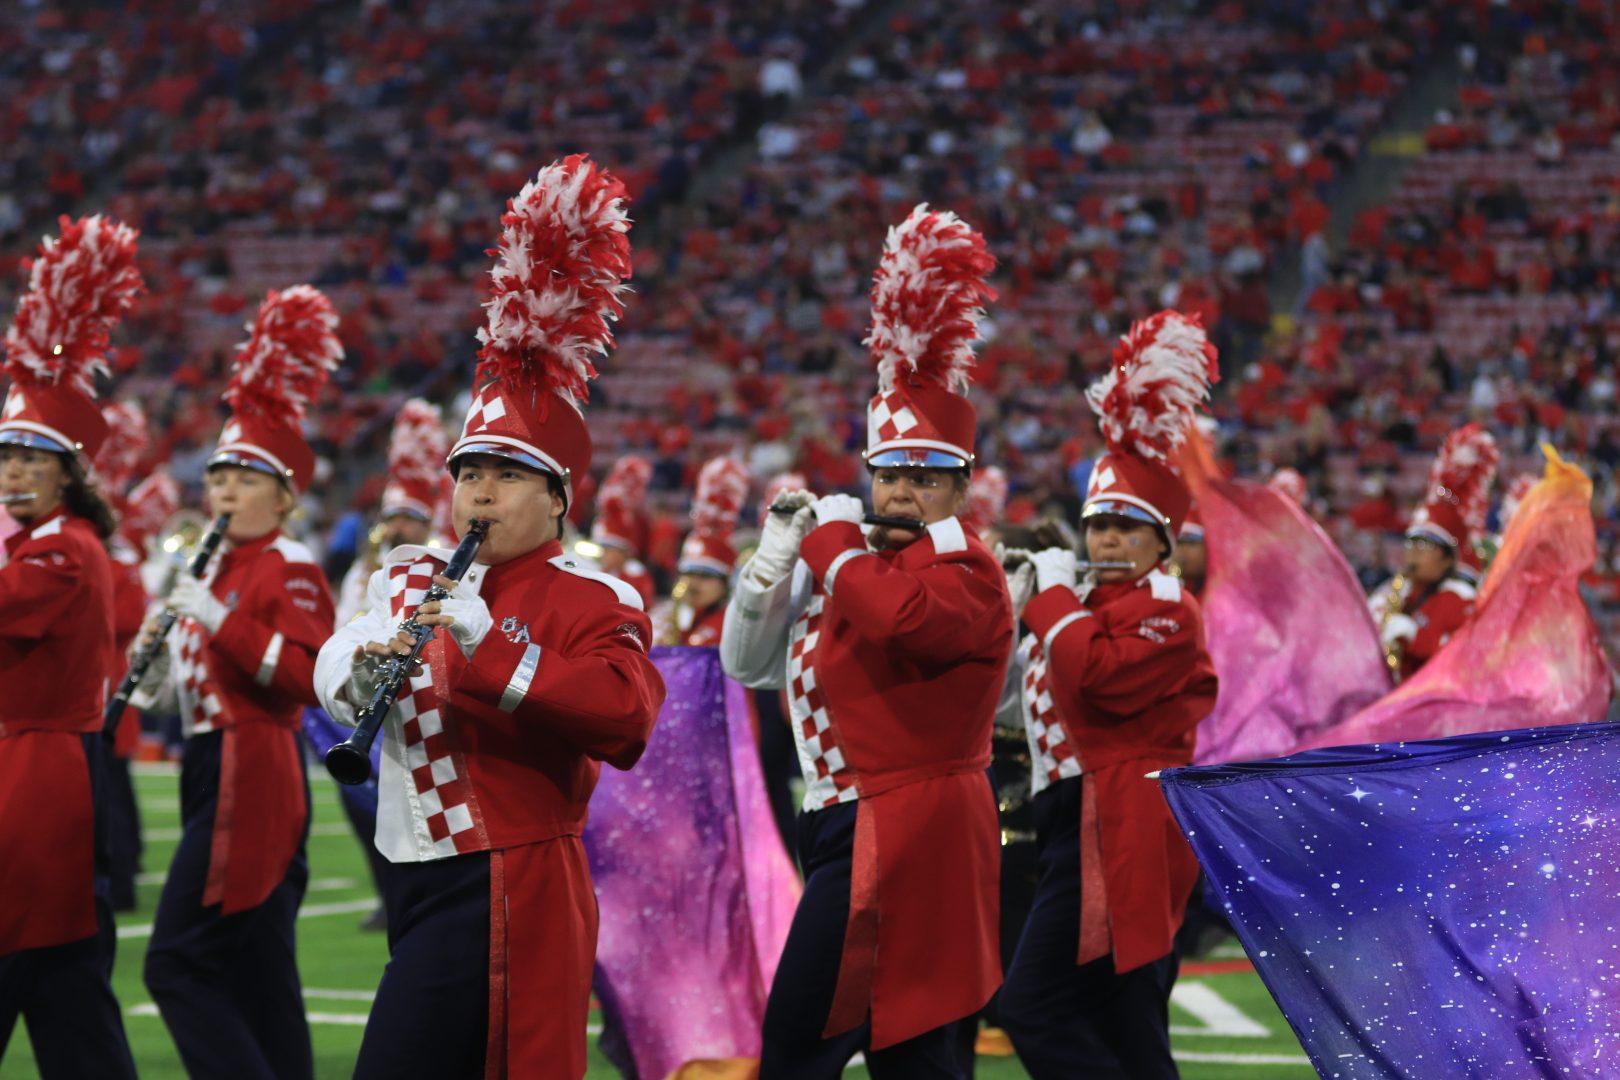 The Bulldog Marching Band performs before a sold out crowd during a Fresno State football game.